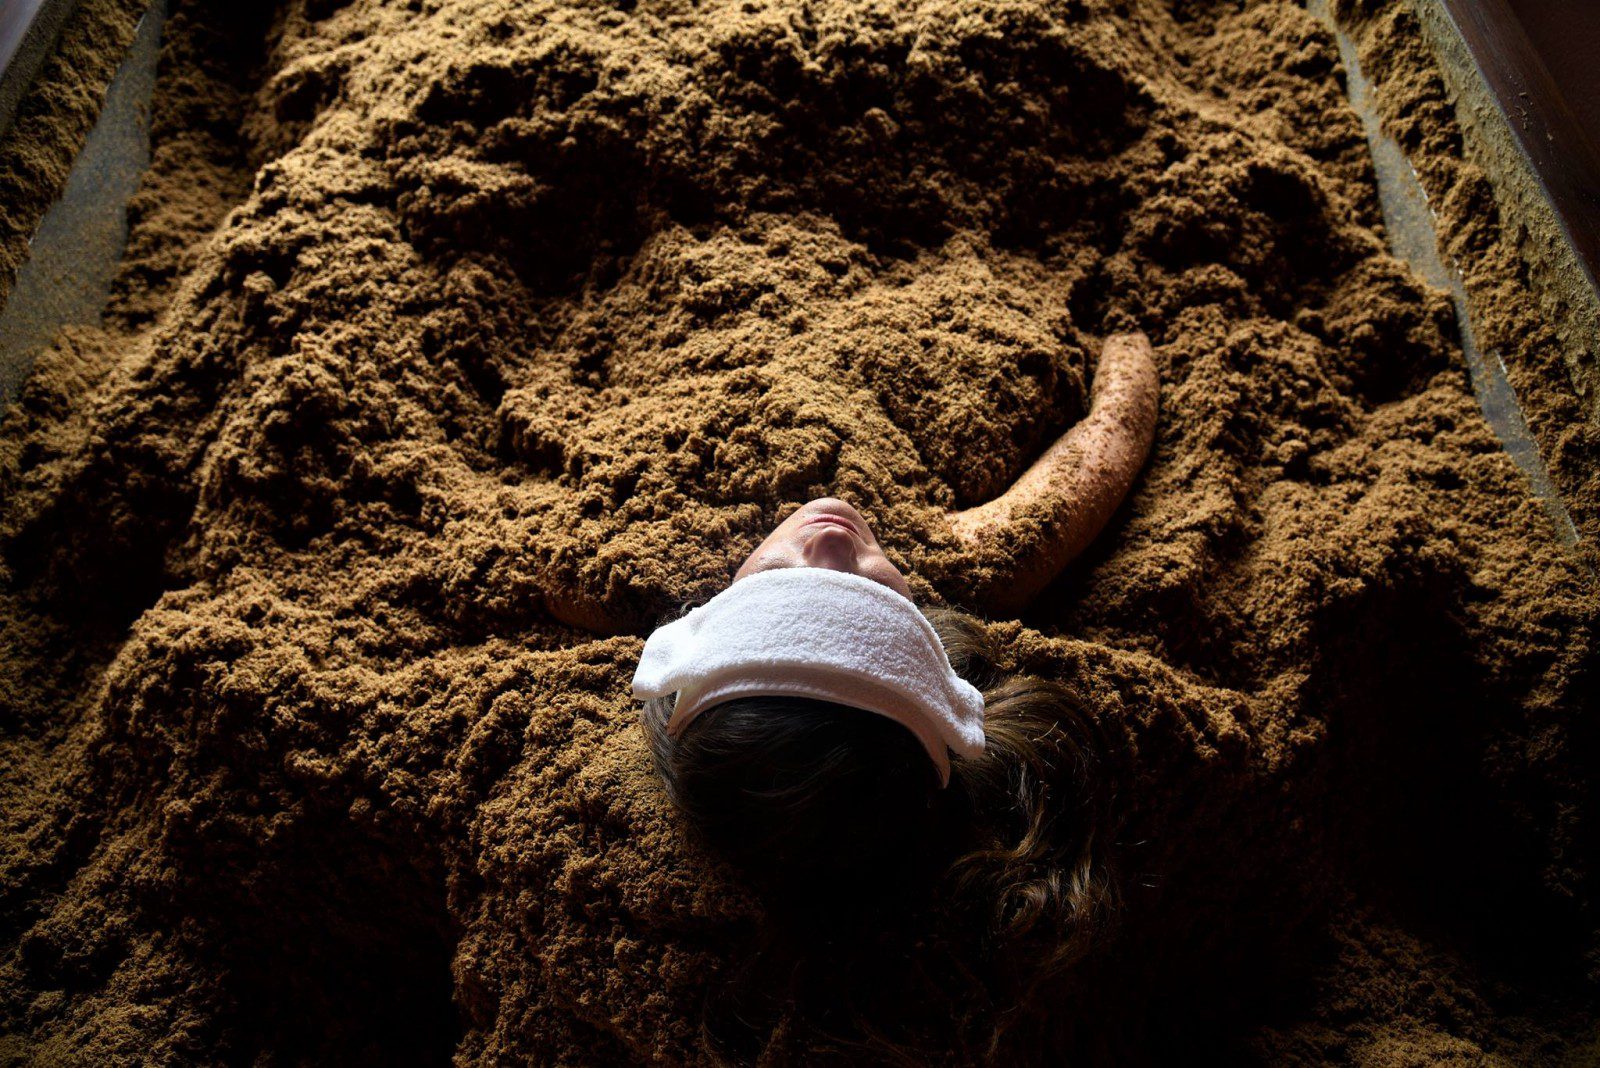 An image of a person taking a cedar enzyme bath in the mud